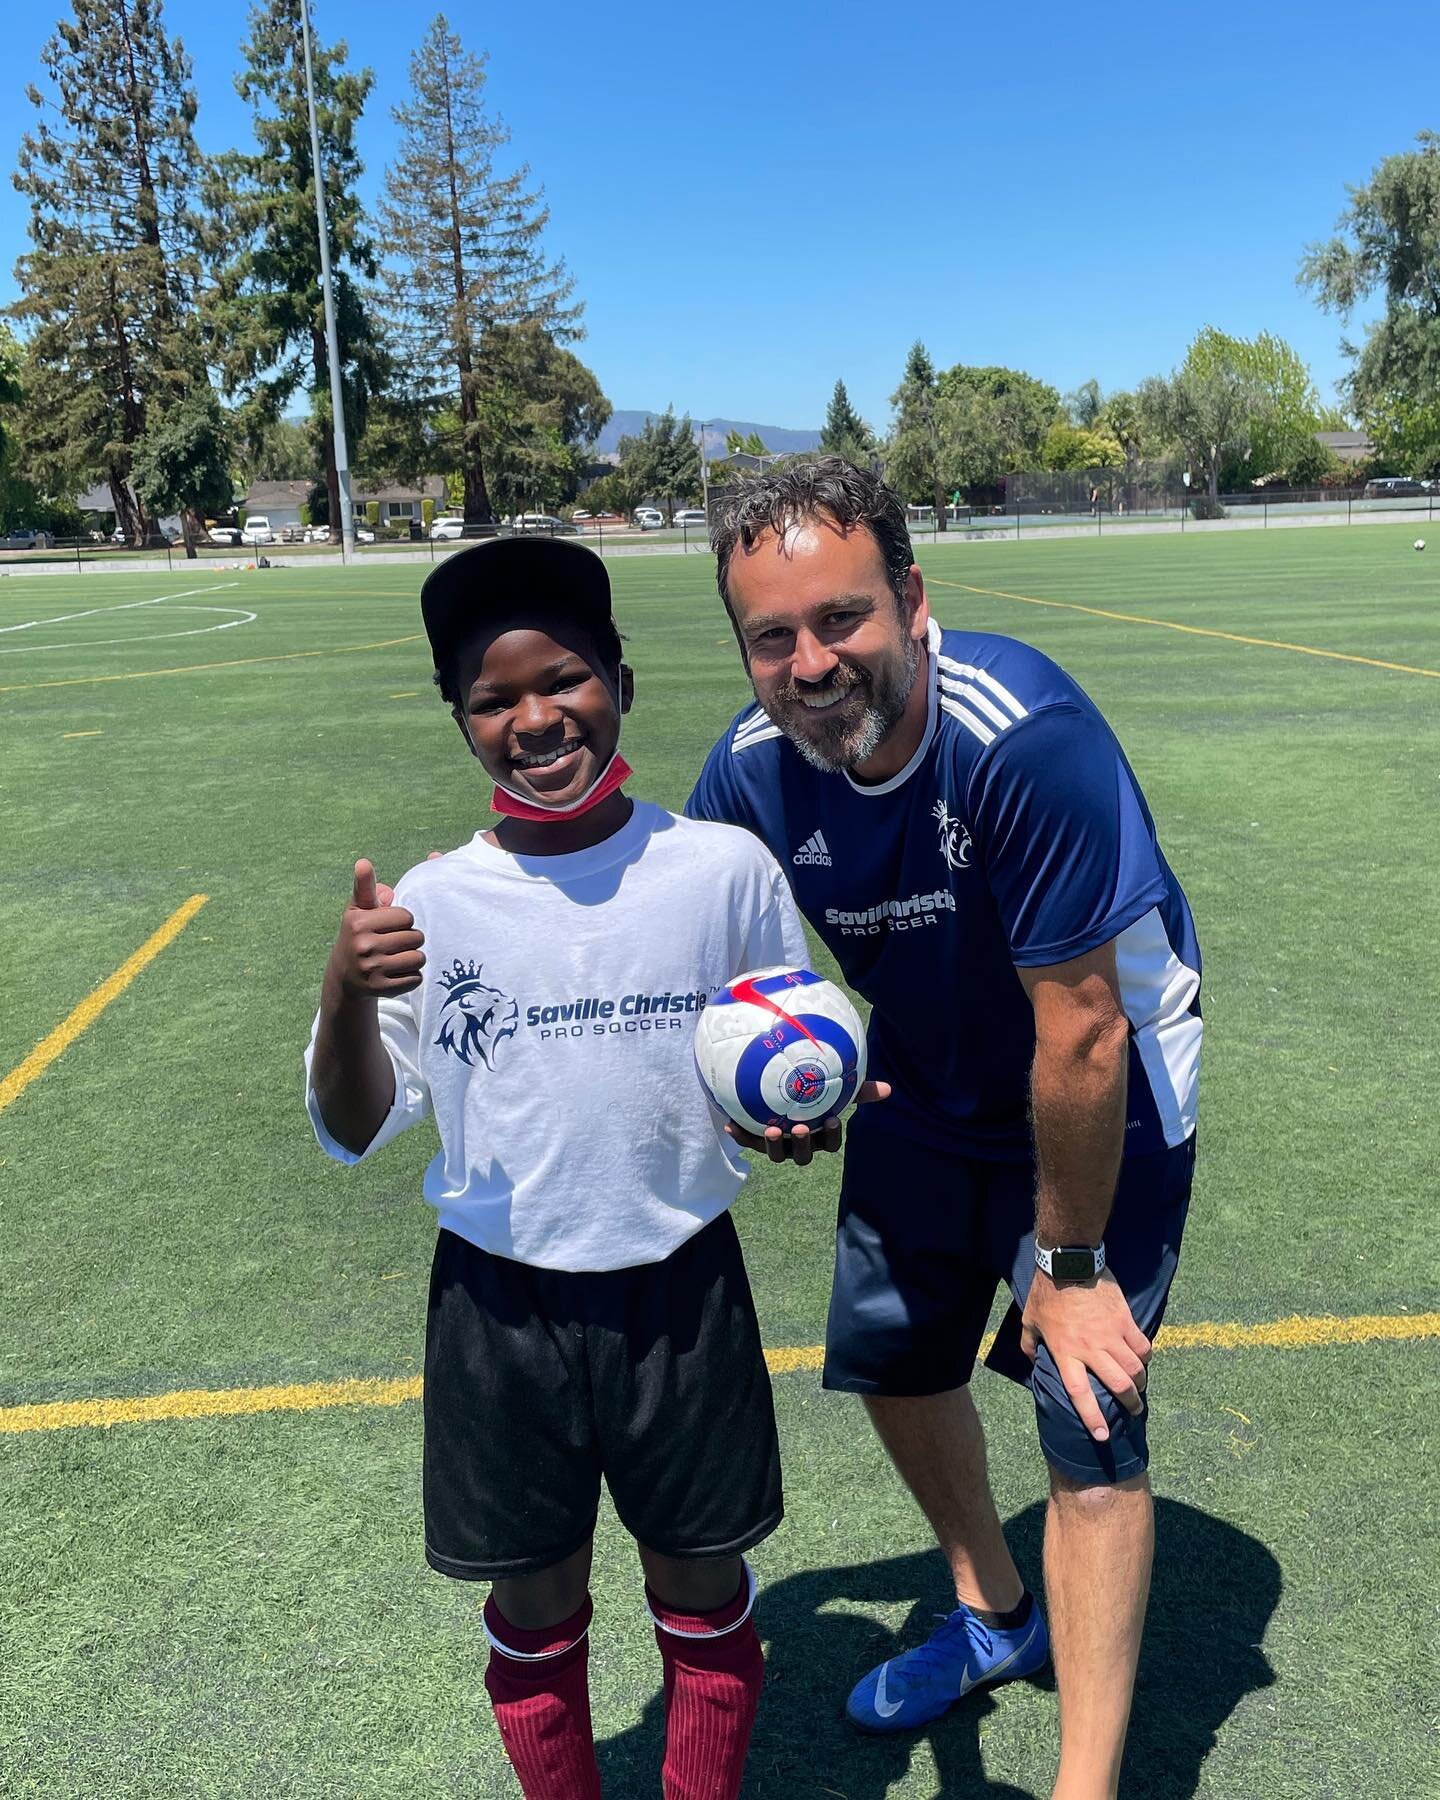 🦁Coach Steve out in the field with a summer camp goer ⚽️☀️🏕
.
.
.
.
.
.
.
#scprosoccer #socceragilitytraining #soccercoach #soccercoaching #soccerdrills #soccercamp #soccercamps #sanjose #santaclara #saratoga #losgatos #campbell #cupertino #morganh